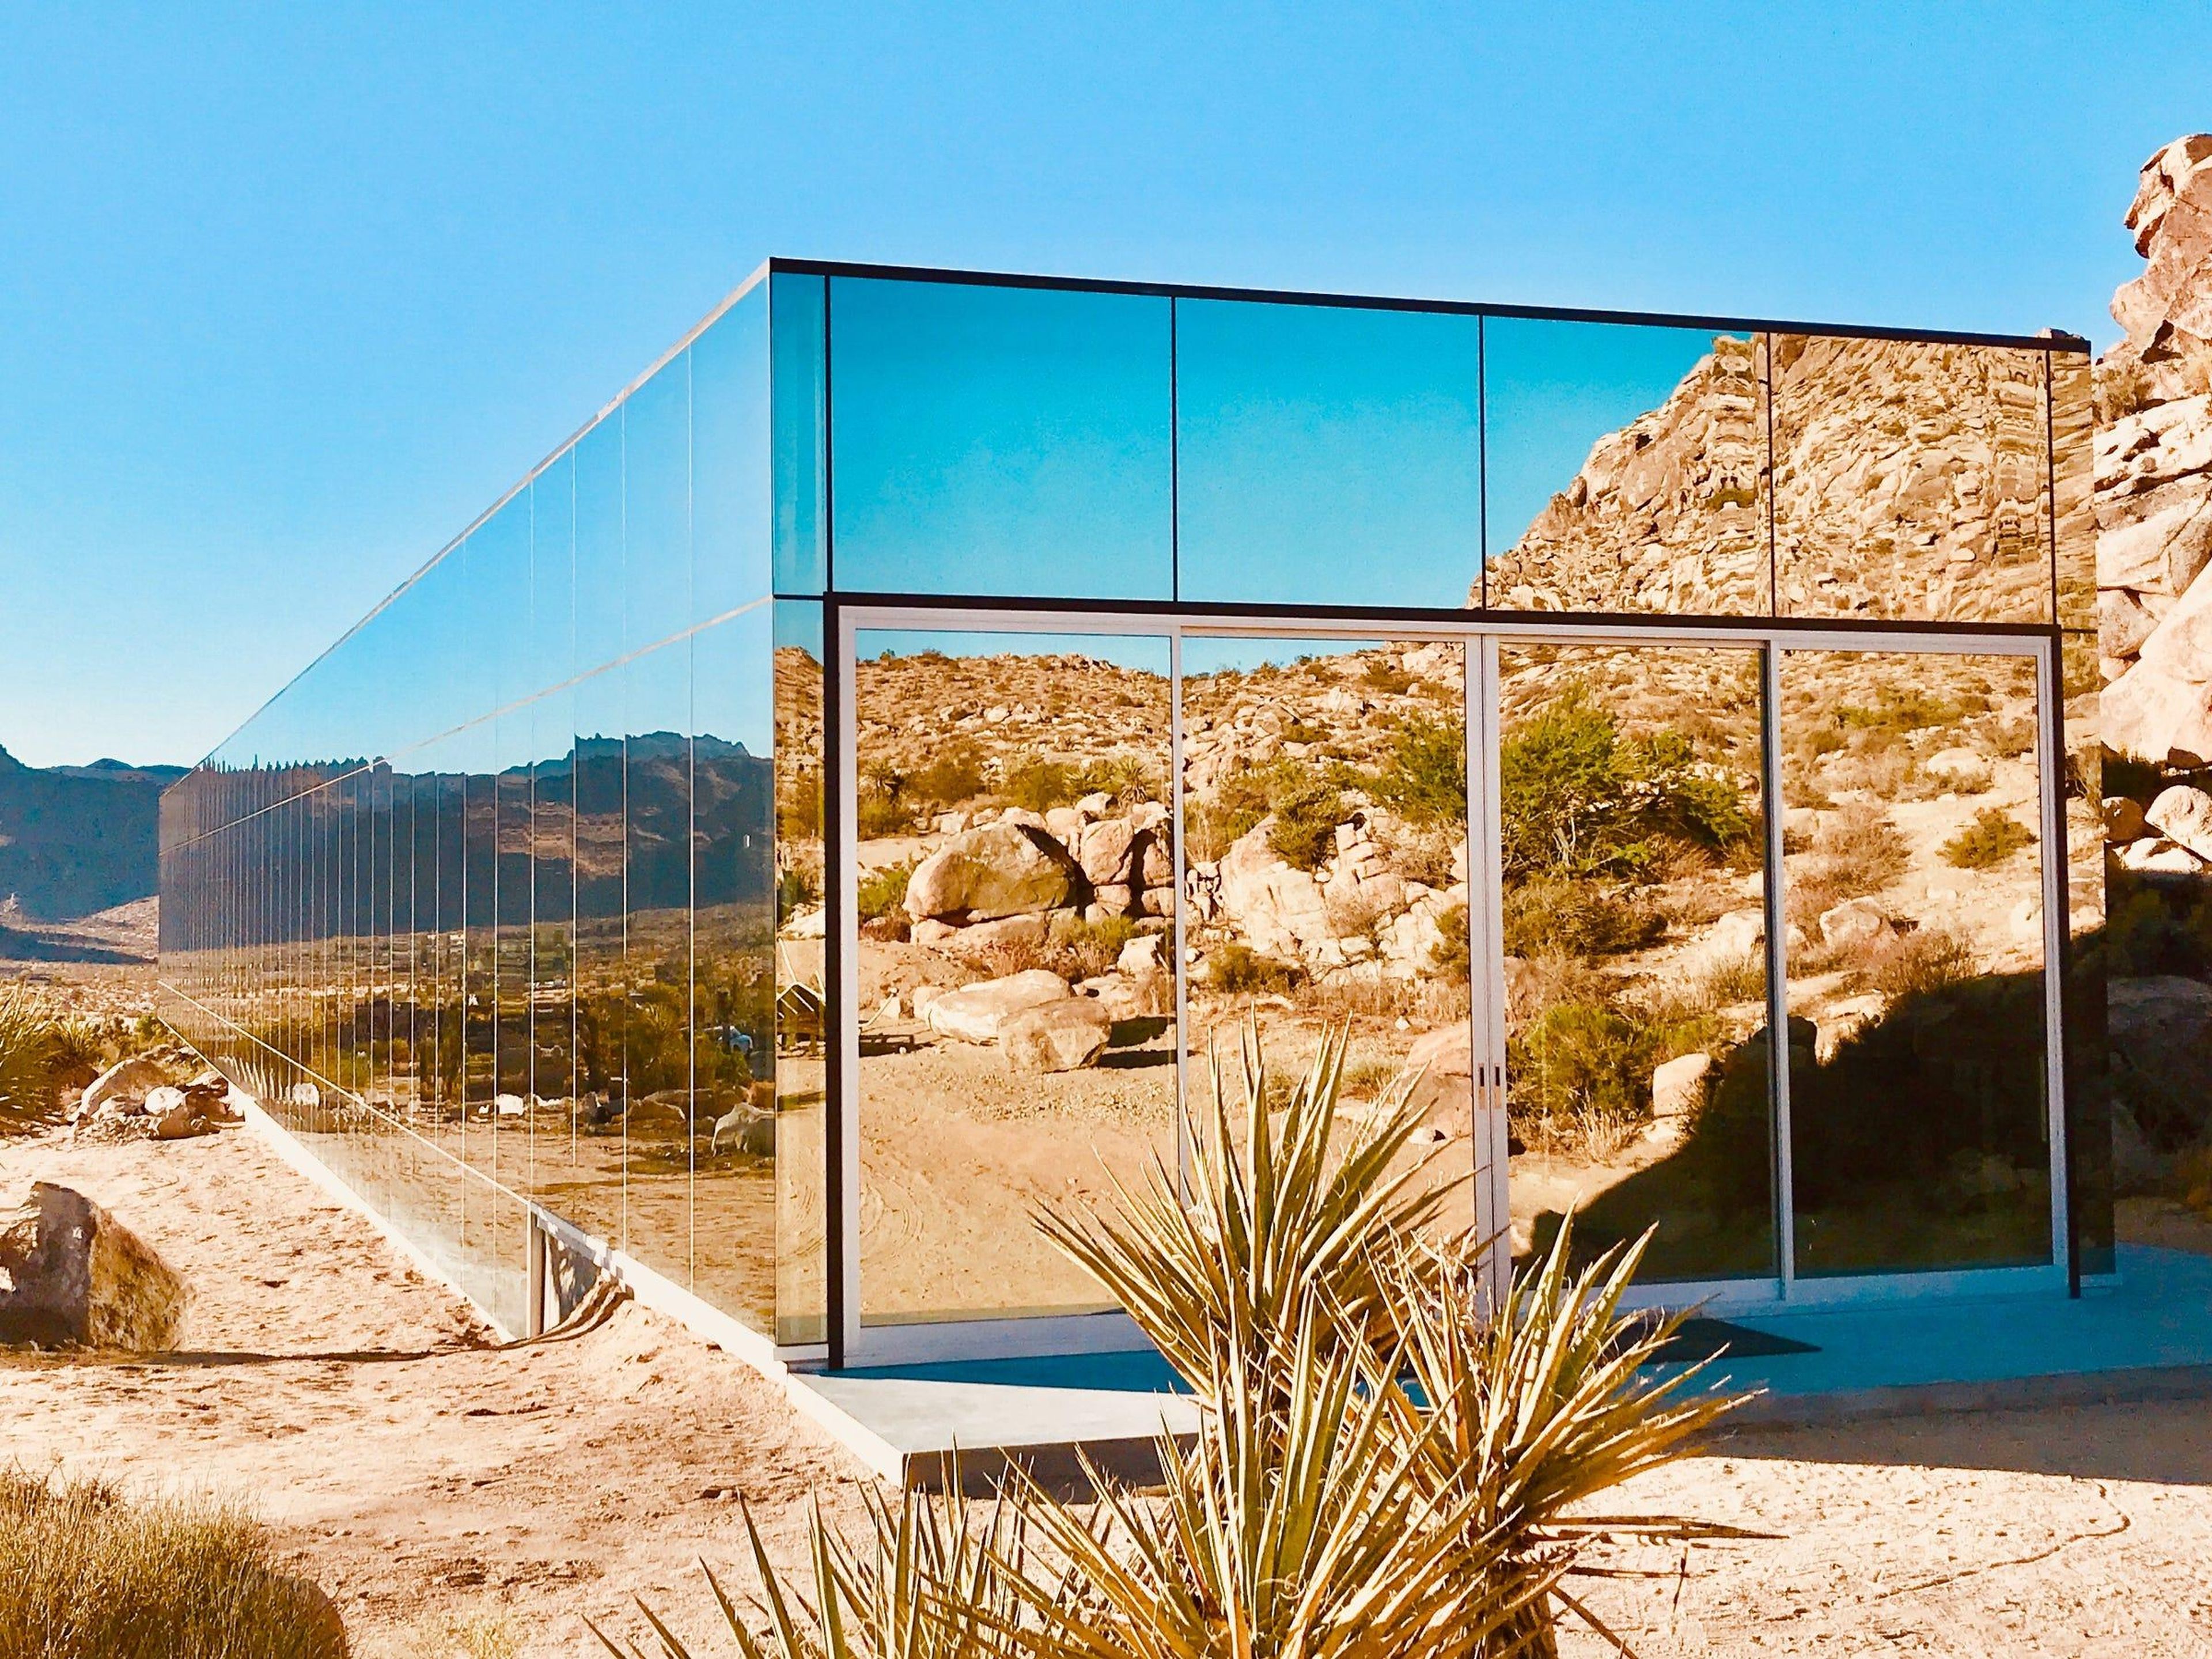 The producer of the cult classic movie 'American Psycho' designed a home in Joshua Tree that looks like a fallen skyscraper, and it's almost entirely covered in mirrors. Take a look inside.